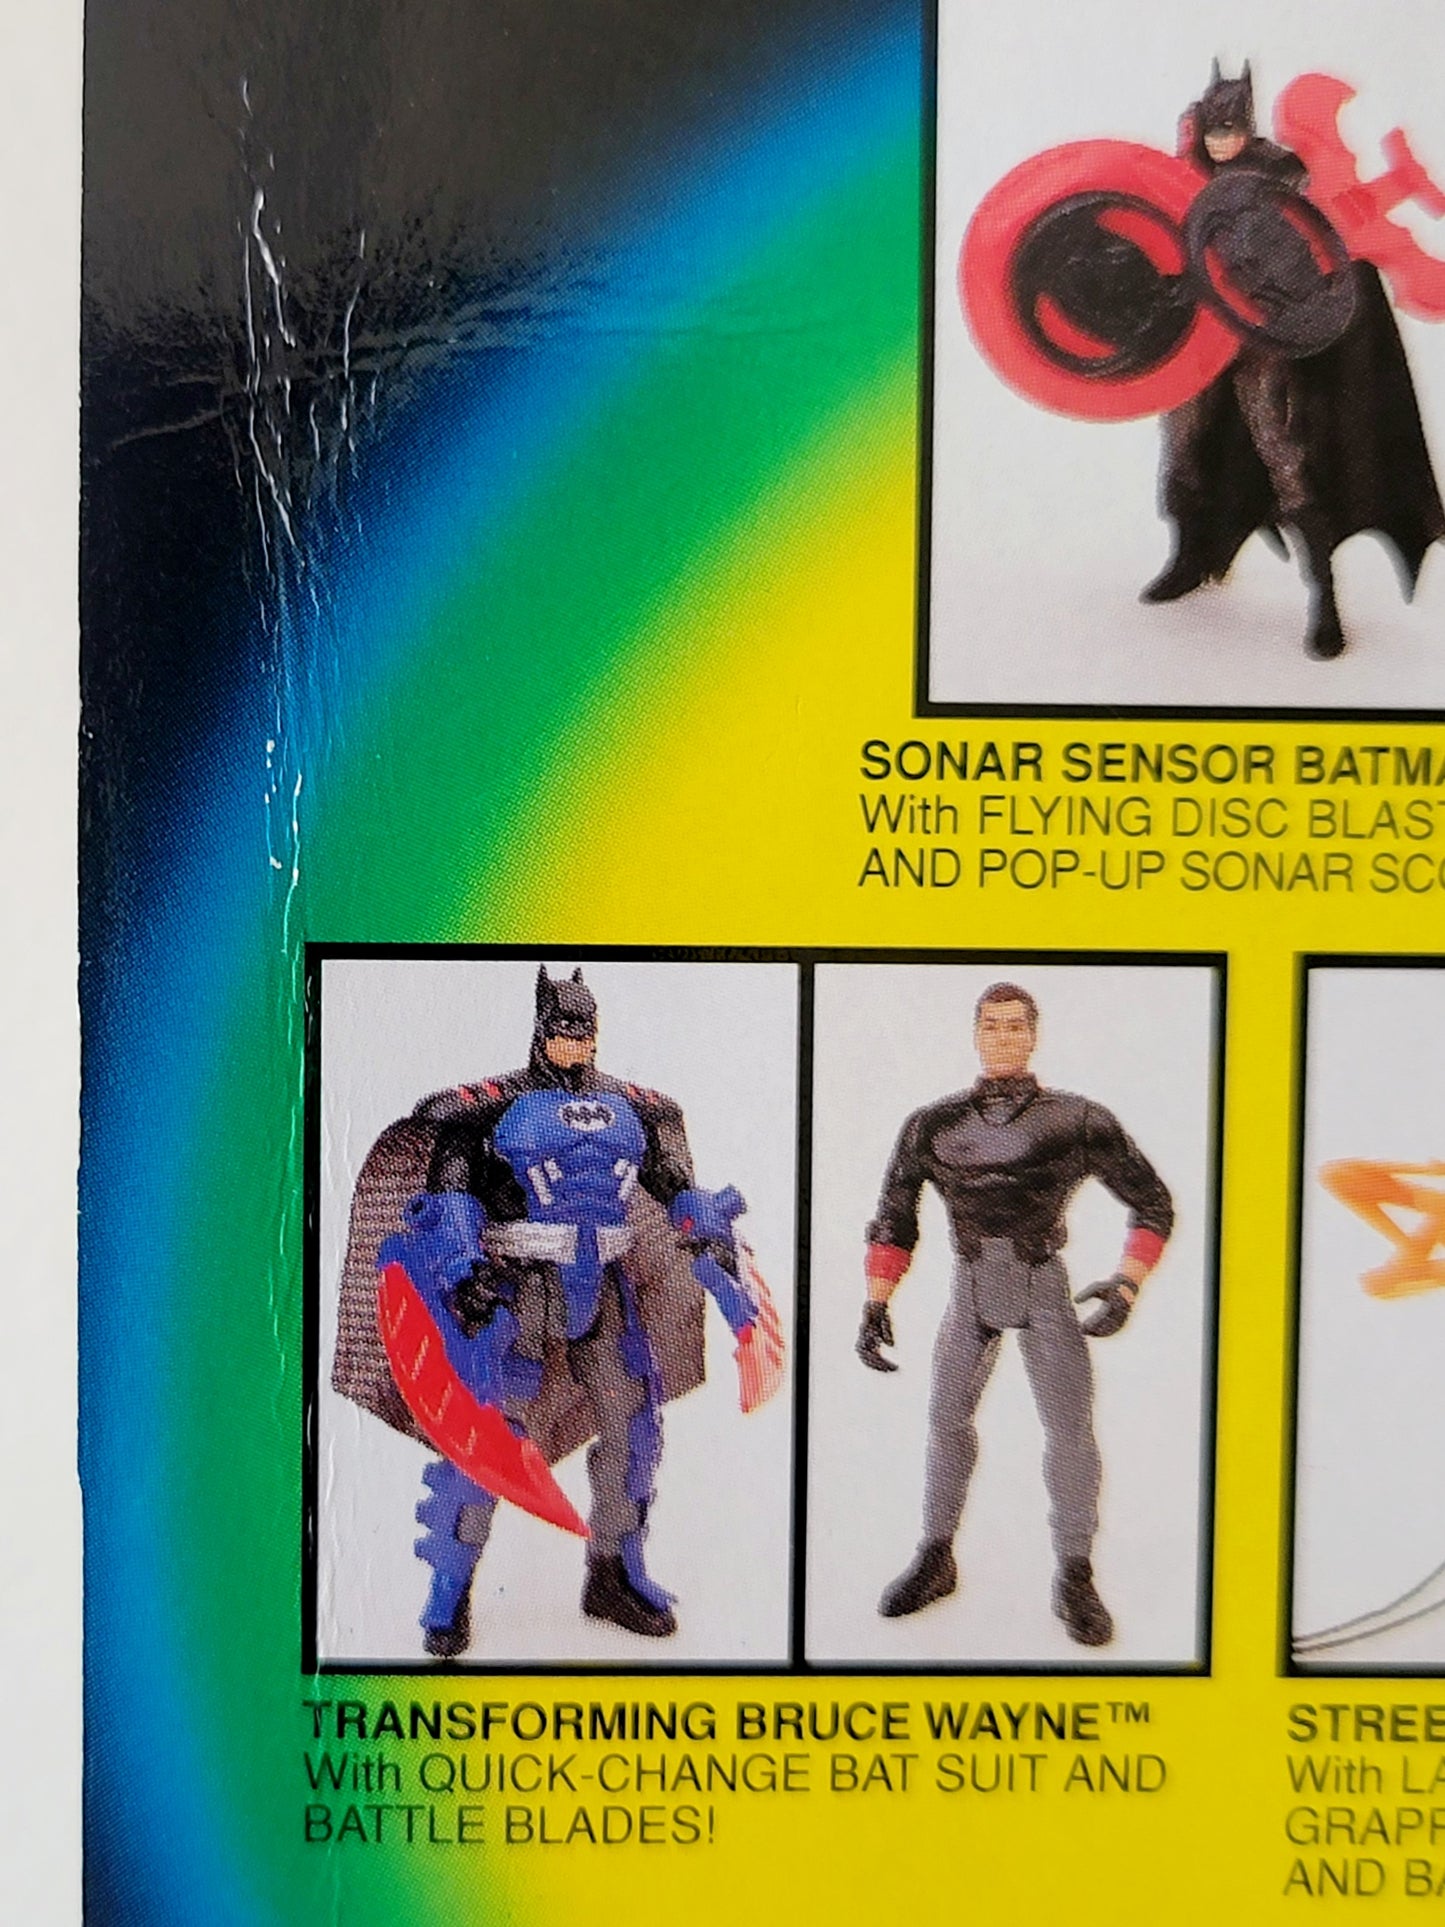 Two-Face with Turbo Charge Cannon Action Figure from Batman Forever